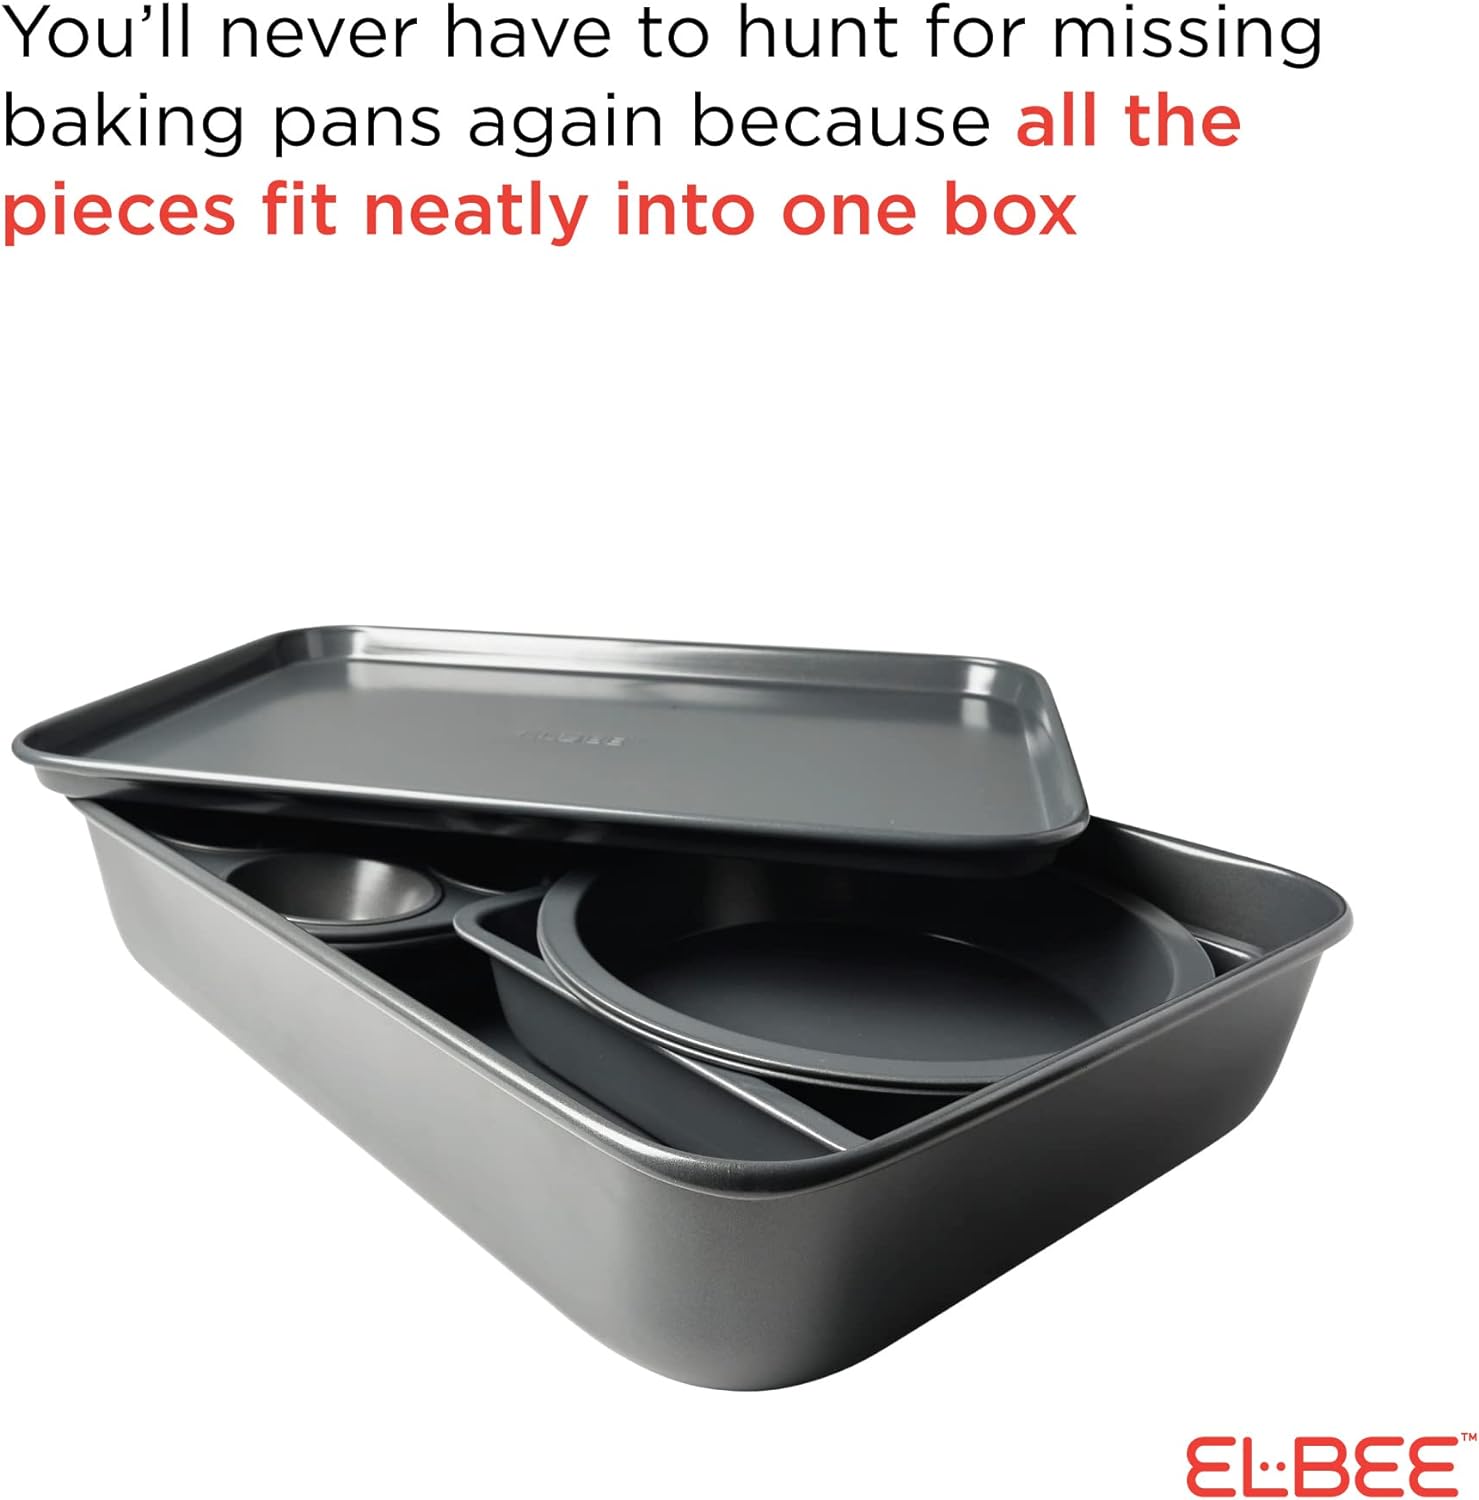  Elbee Home 8-Piece Nonstick Aluminized Steel, Space Saving Baking  Set , With Deep Roasting Pan, Cookie Sheet, Cake Pans, Muffin Pans and  Baking Pan PFOA & PFOS Free: Home & Kitchen